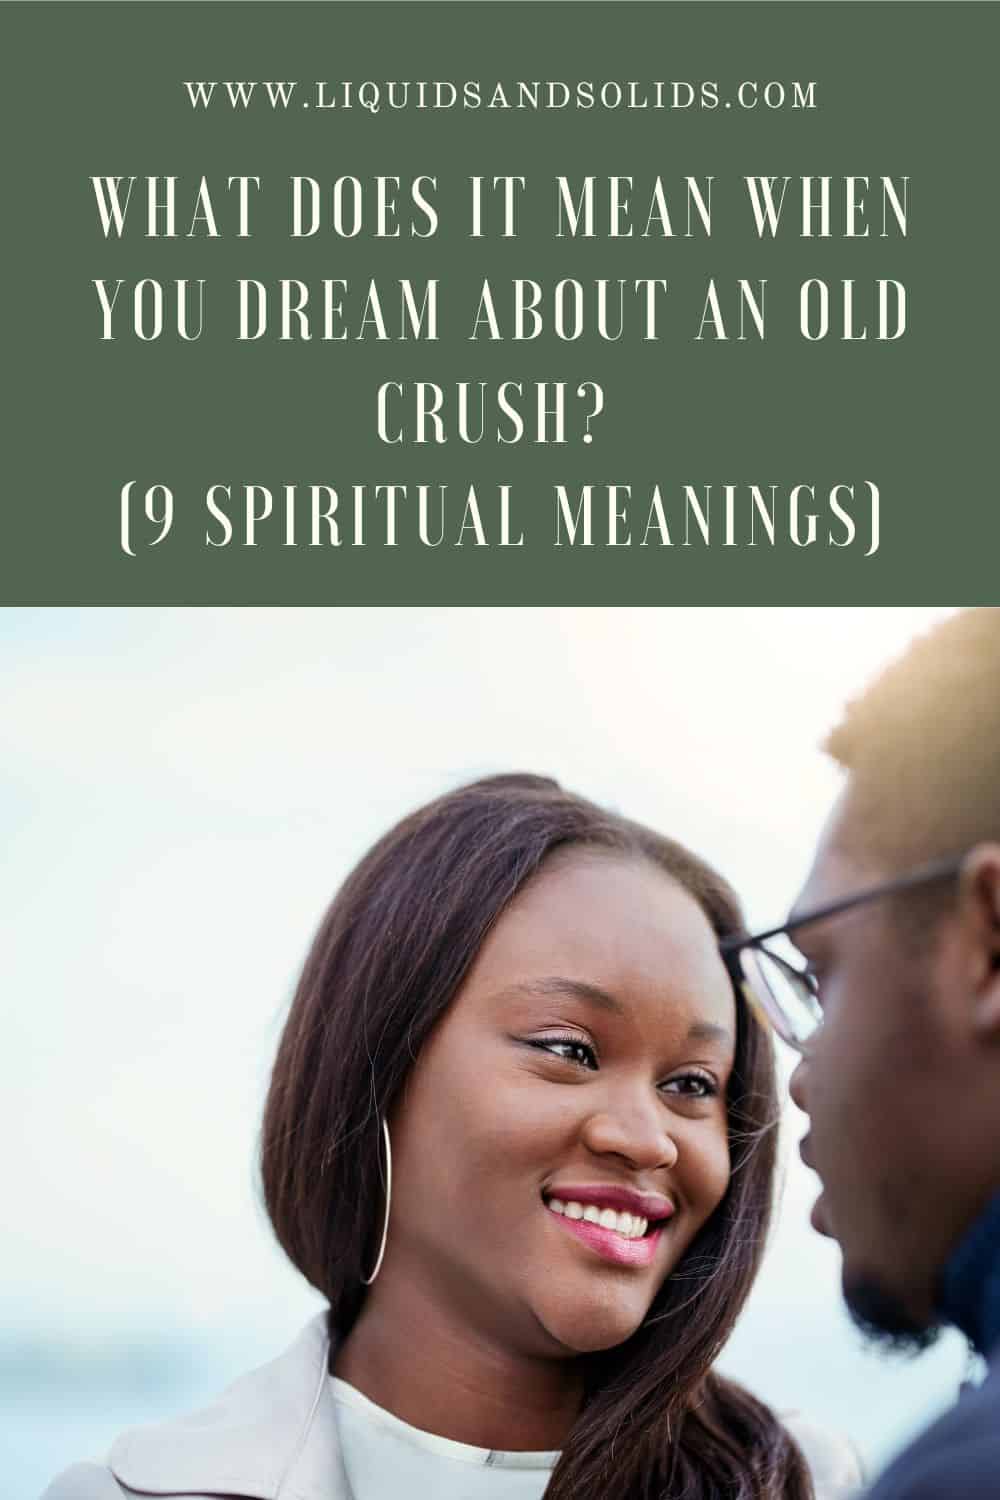 What Does It Mean When You Dream About An Old Crush? (9 Spiritual Meanings)